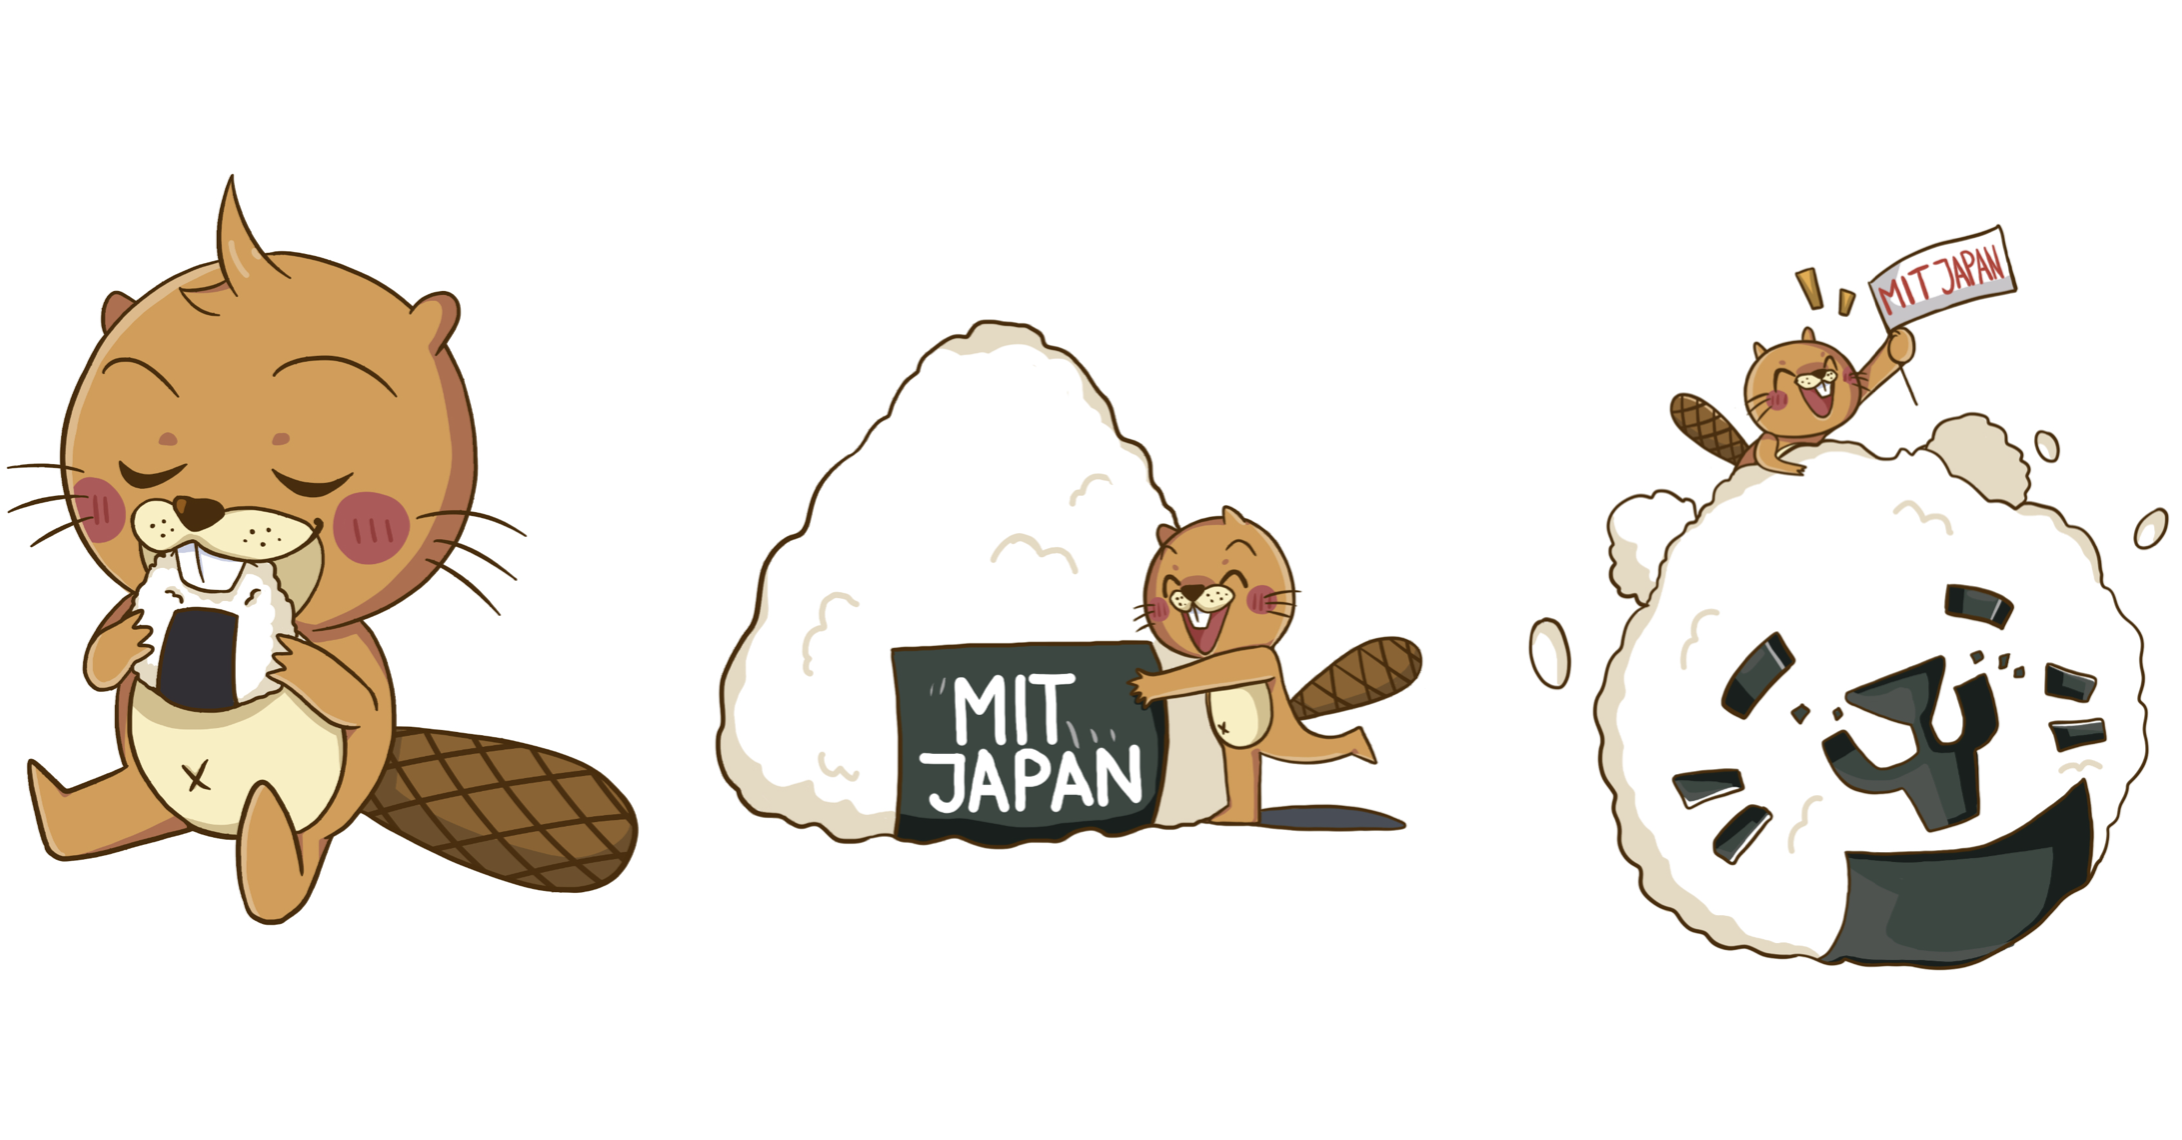 Illustrations of Tim the Beaver eating a onigiri. In the middle, Tim is hugging a large onigiri that's 2 times his size. Third illustration is Tim the beaver on top of a onigiri rice ball with a smiley face holding a flag that says MIT Japan